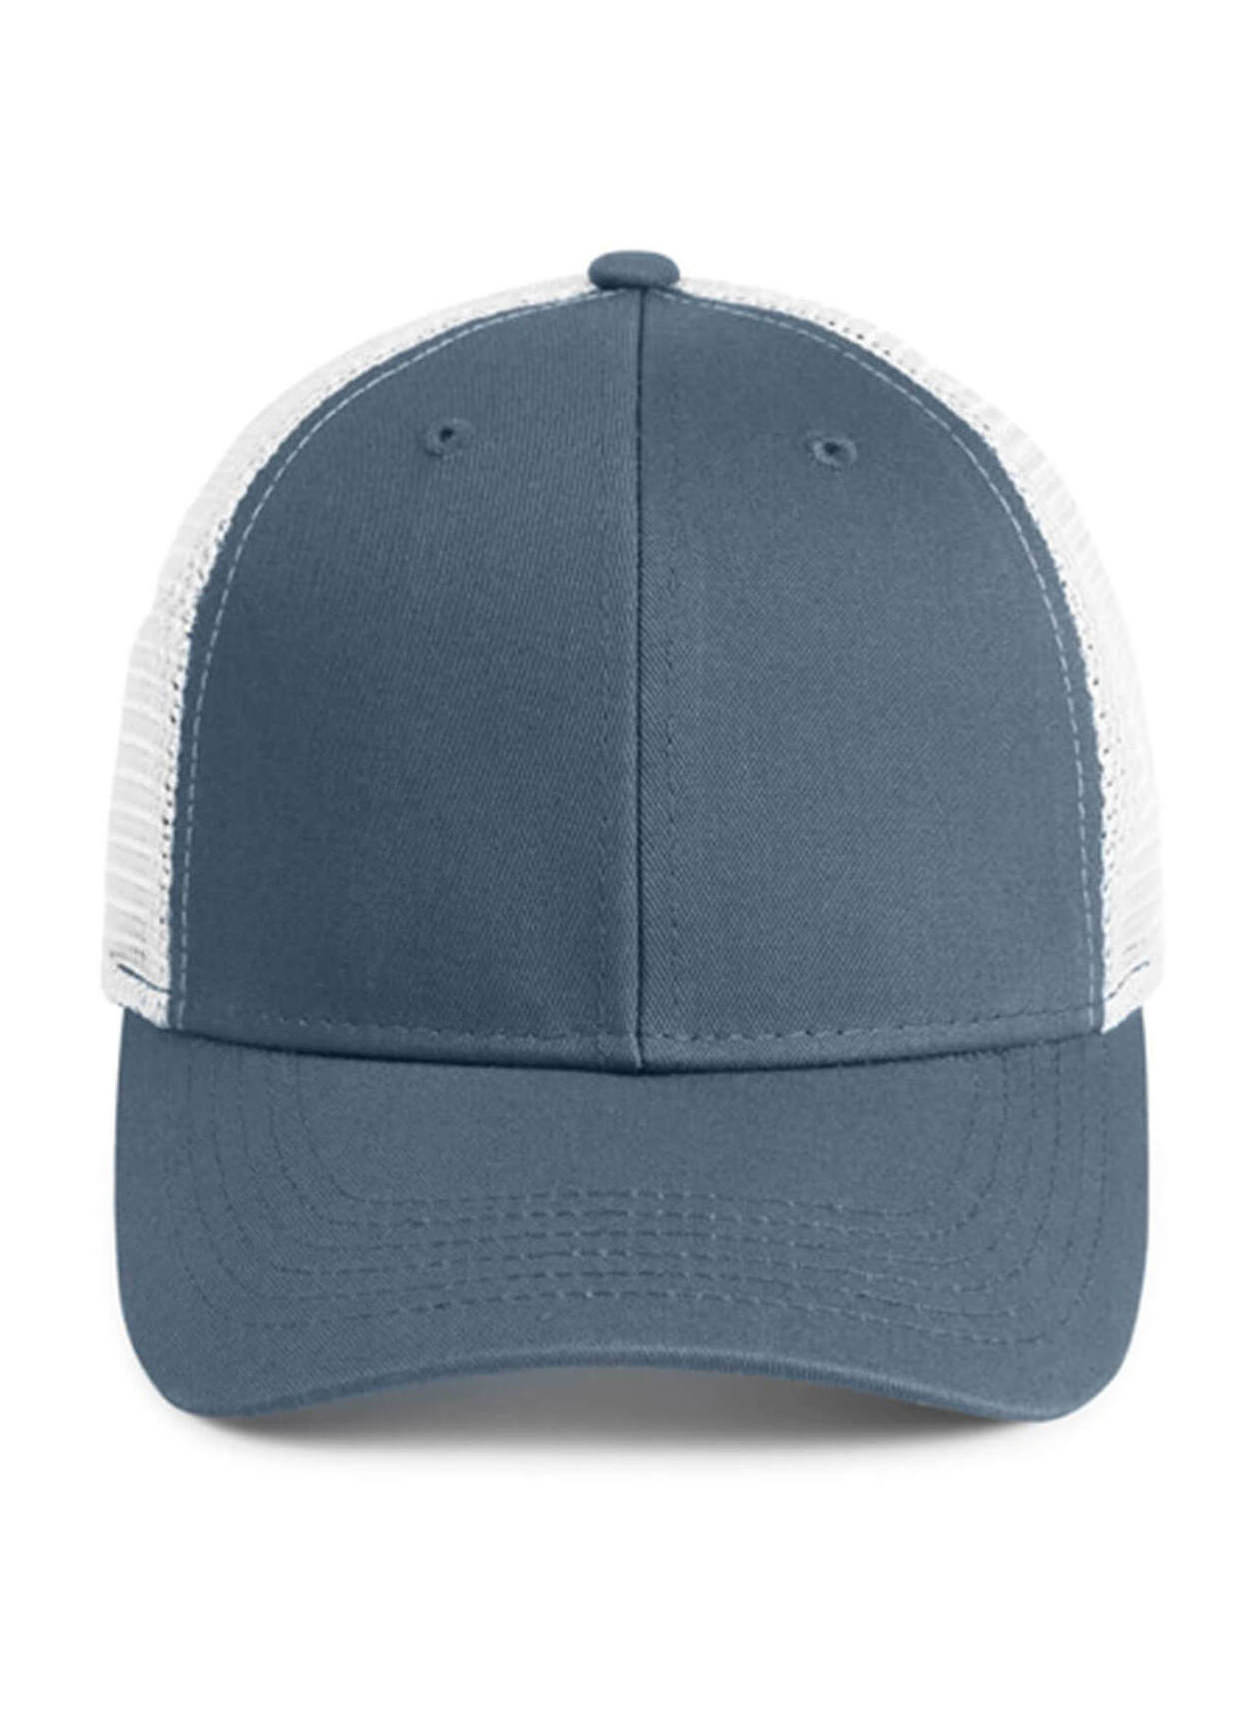 Imperial Breaker Blue / White The Catch & Release Hat Adjustable Meshback Hat